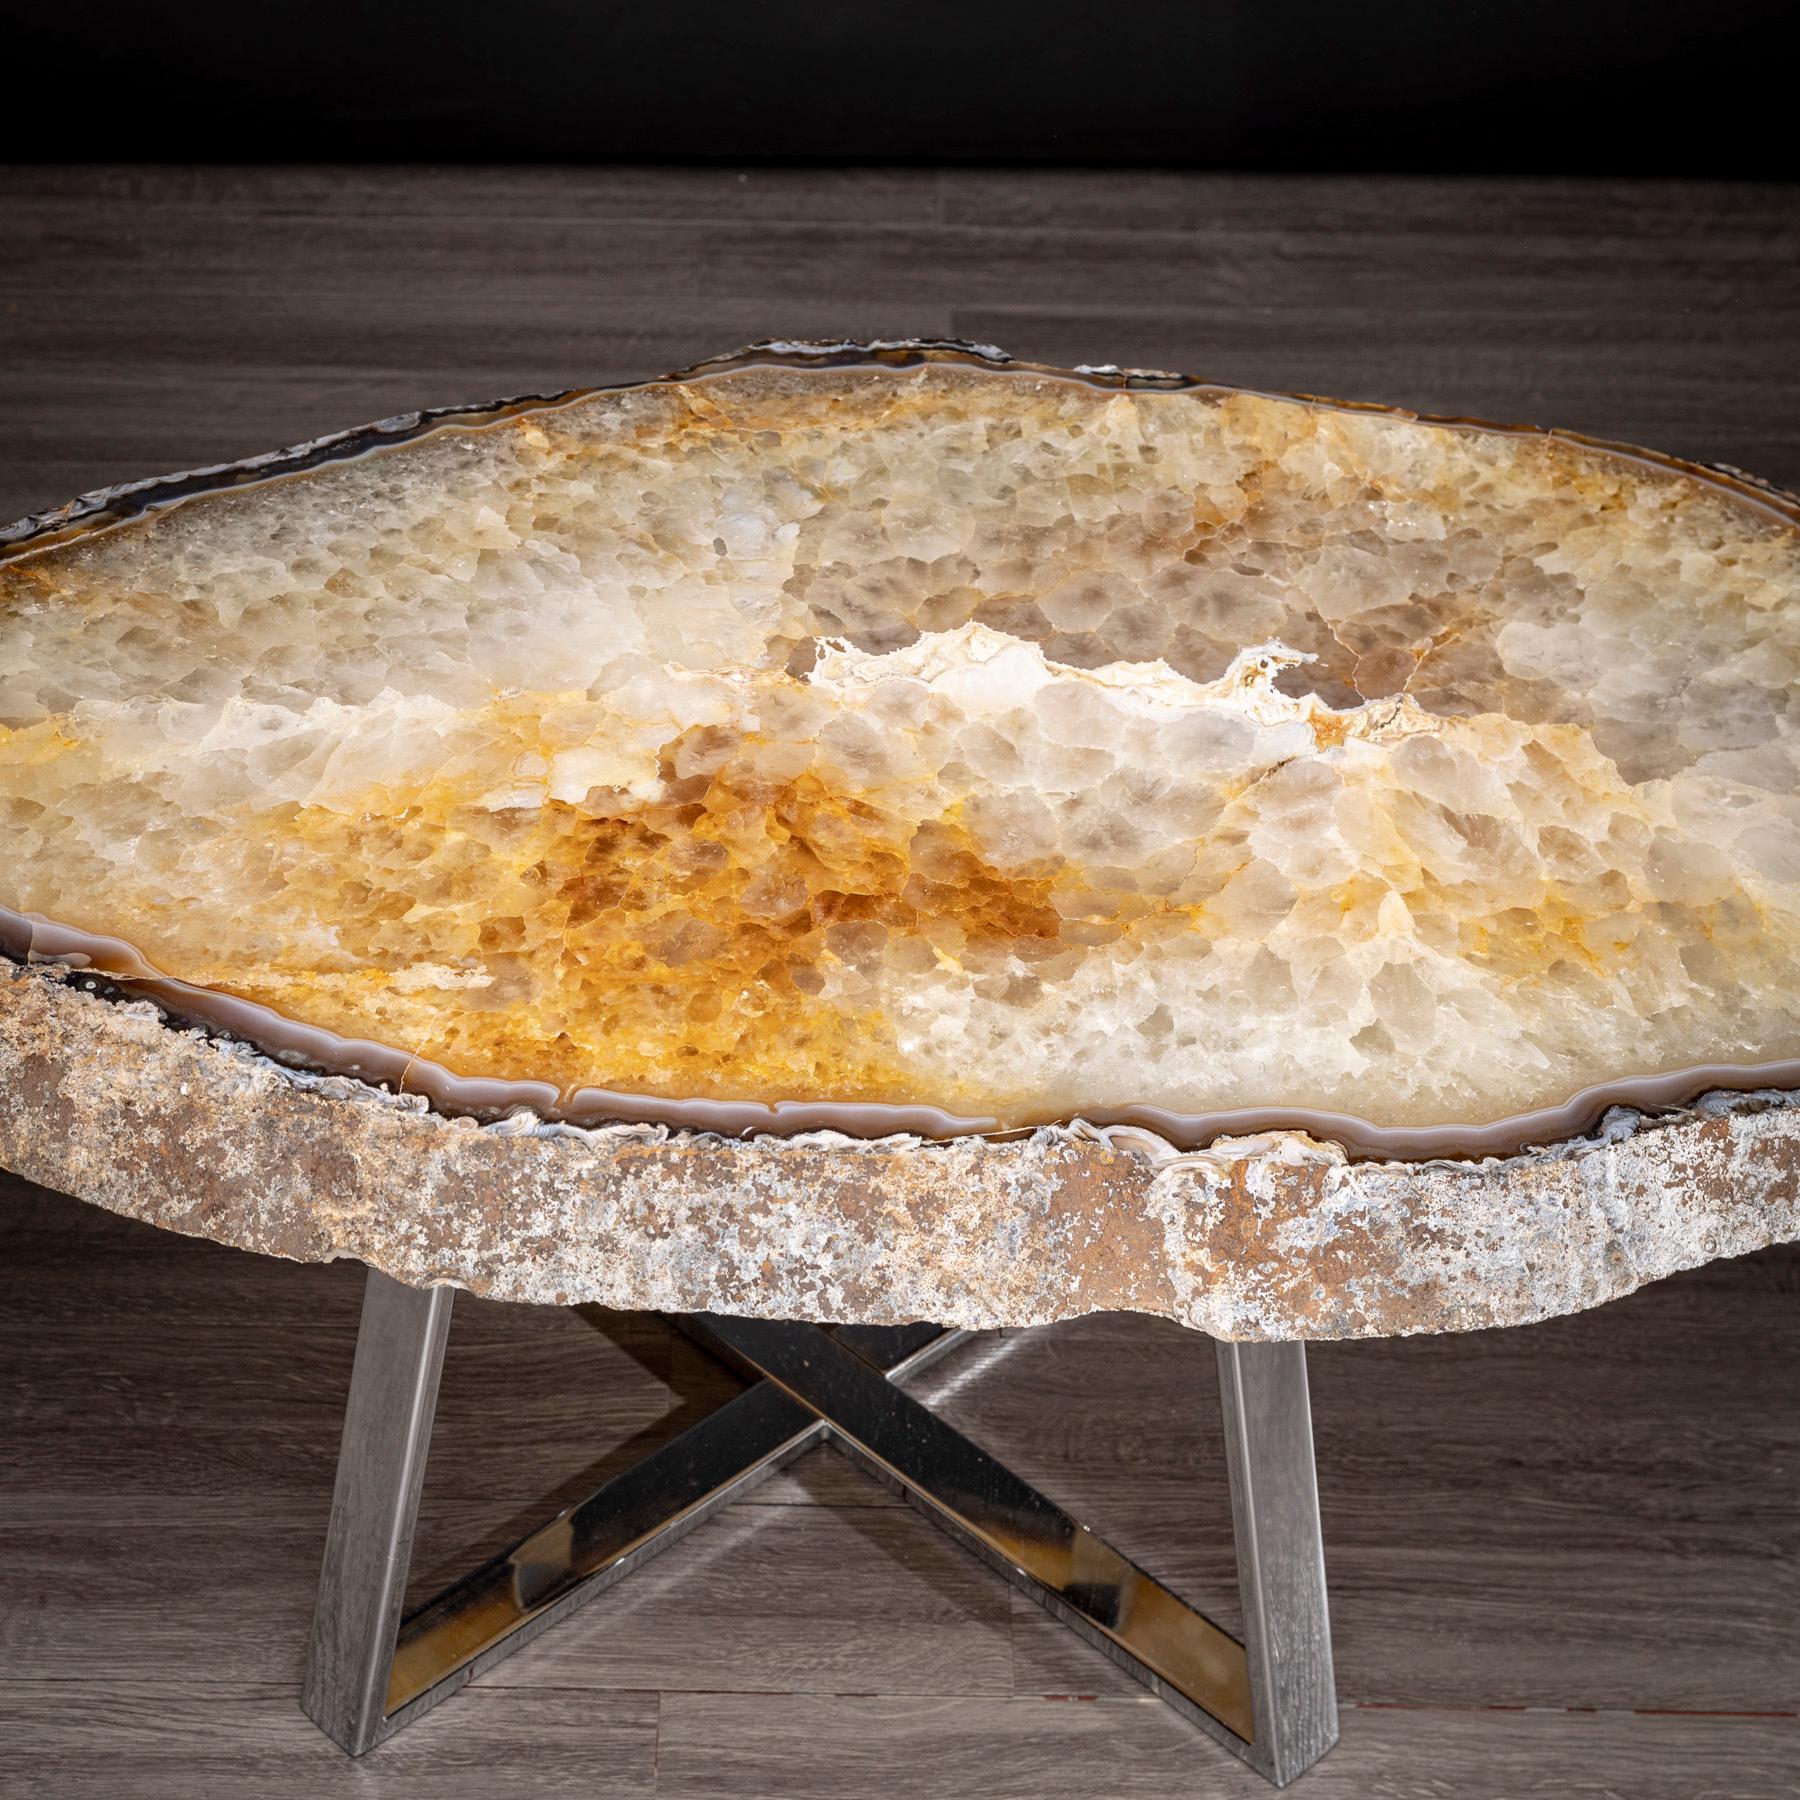 Contemporary Side or Center Table, Brazilian Agate with Nickel Finish Metal Base